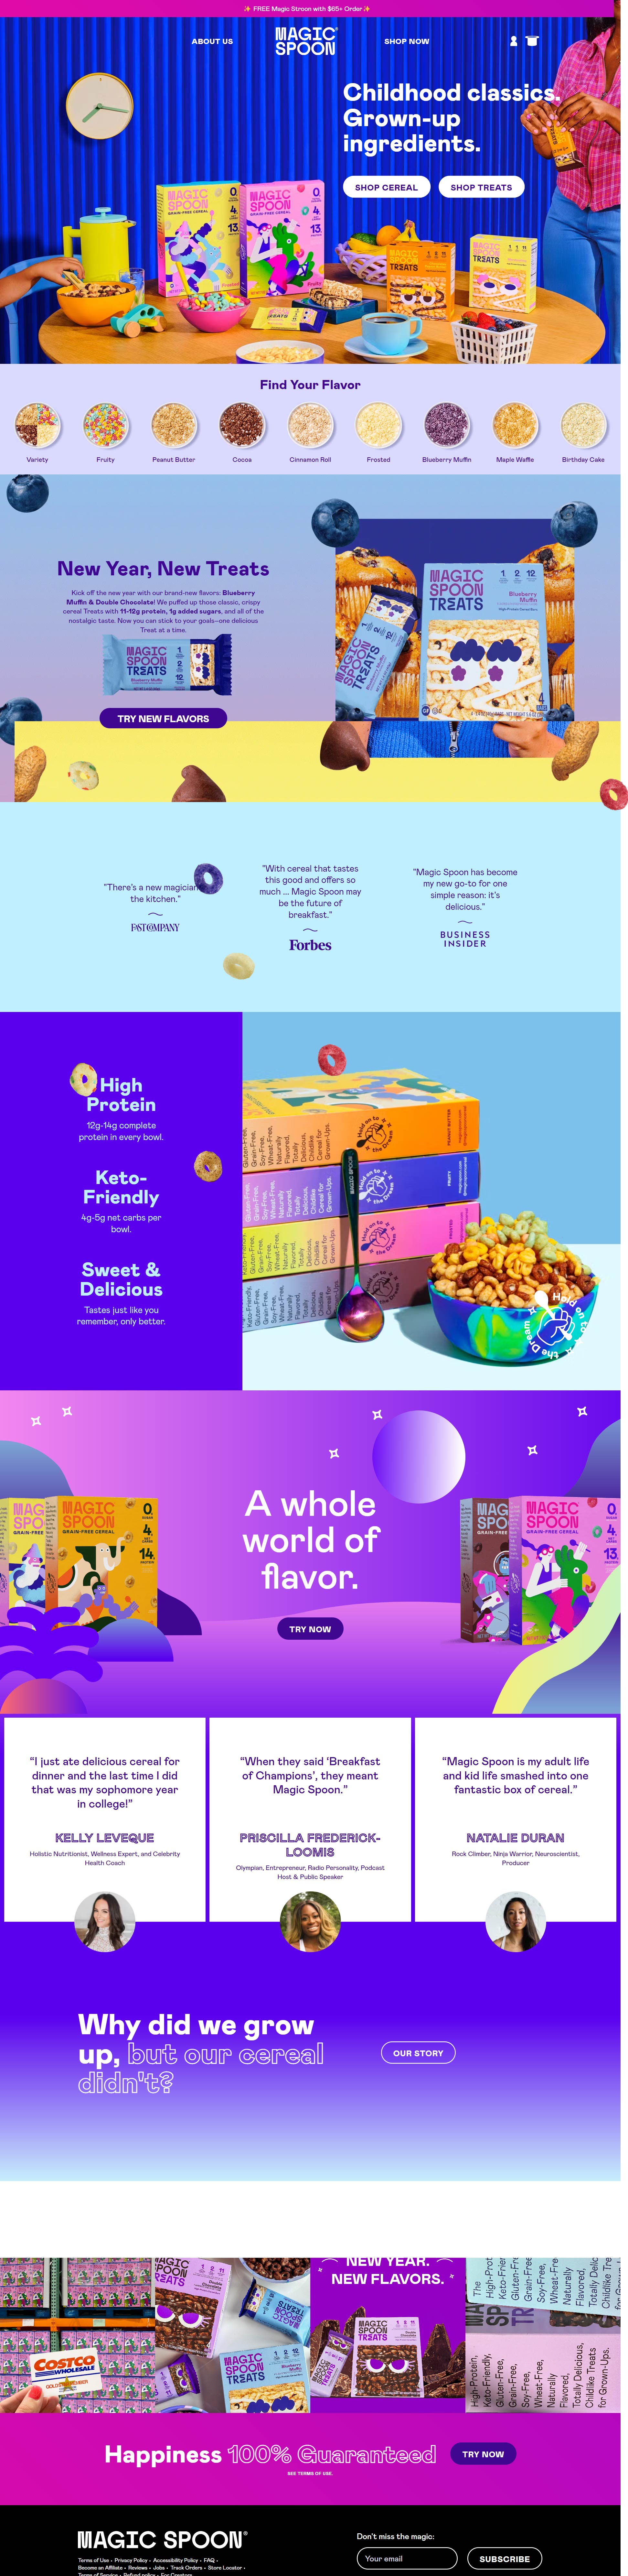 Magic Spoon- email capture landing page